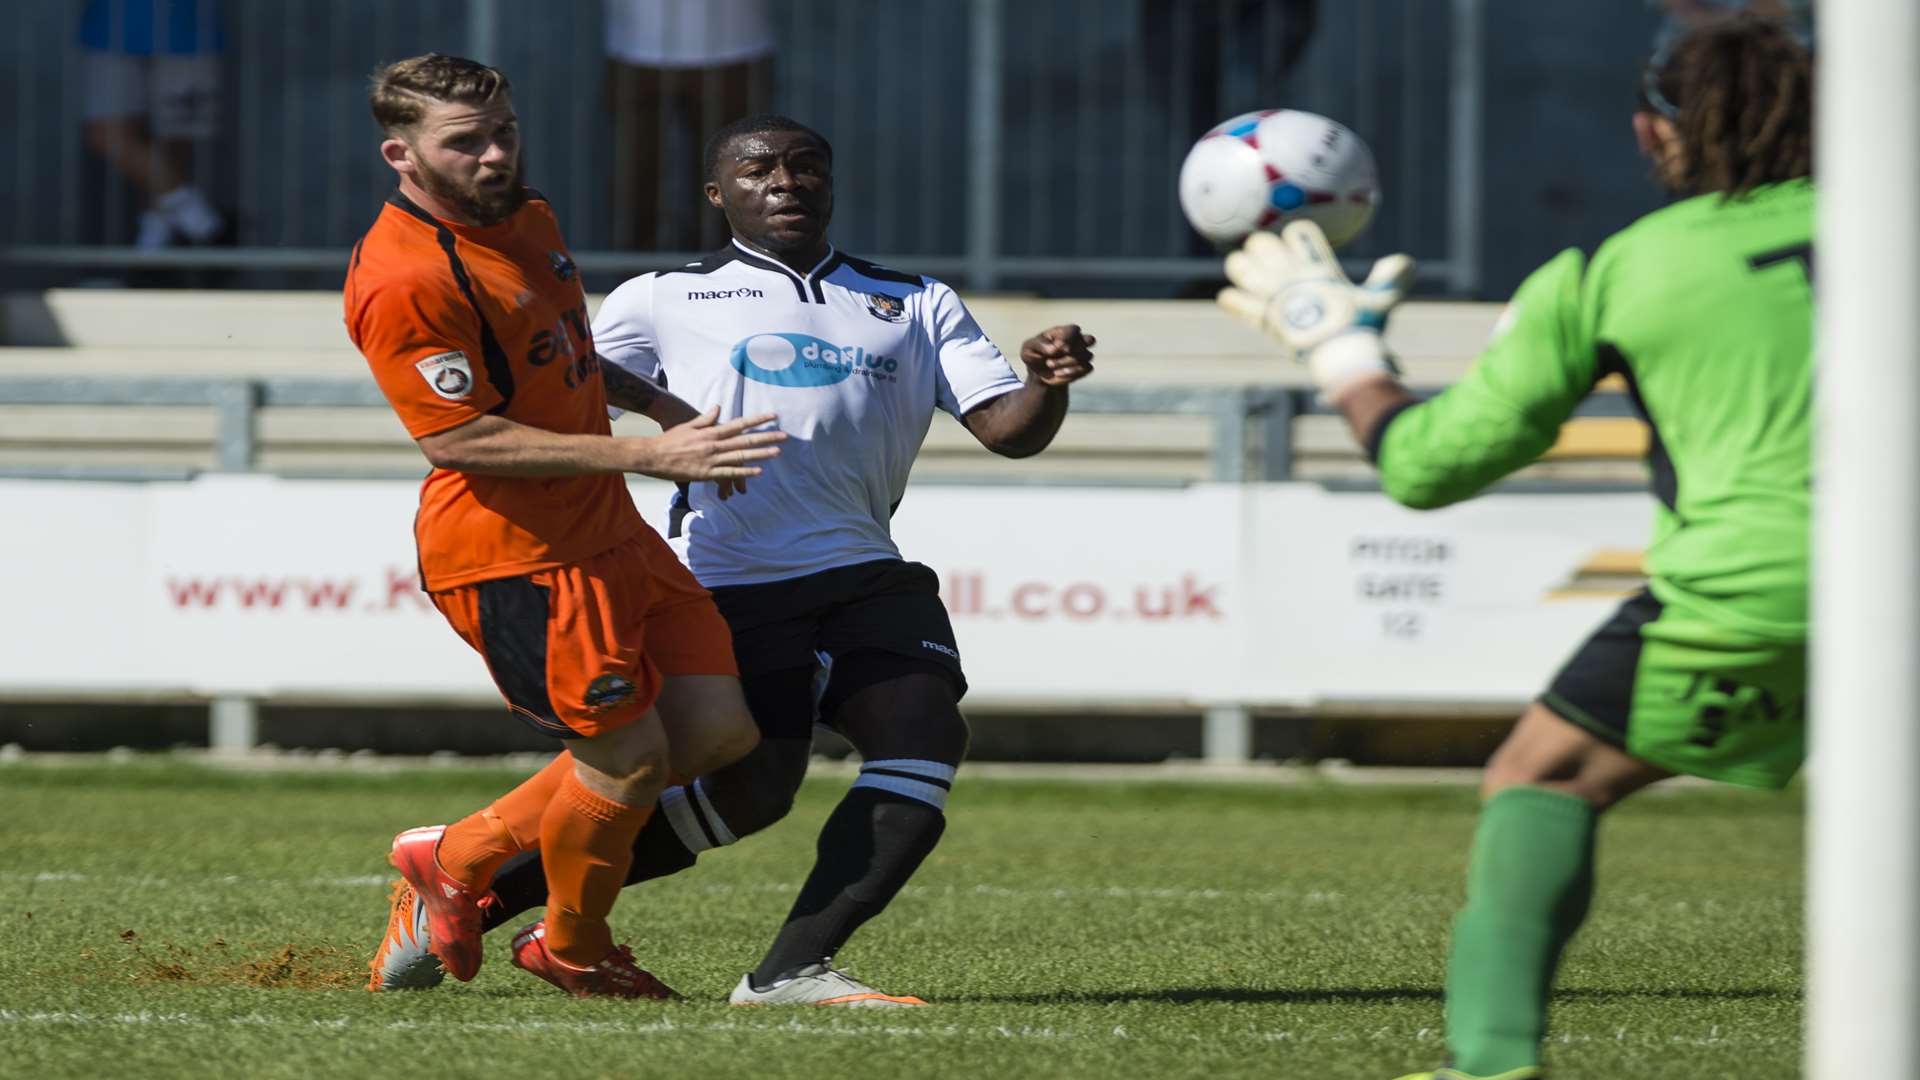 On-loan left-back Mark Onyemah gets a shot away for Dartford Picture: Andy Payton